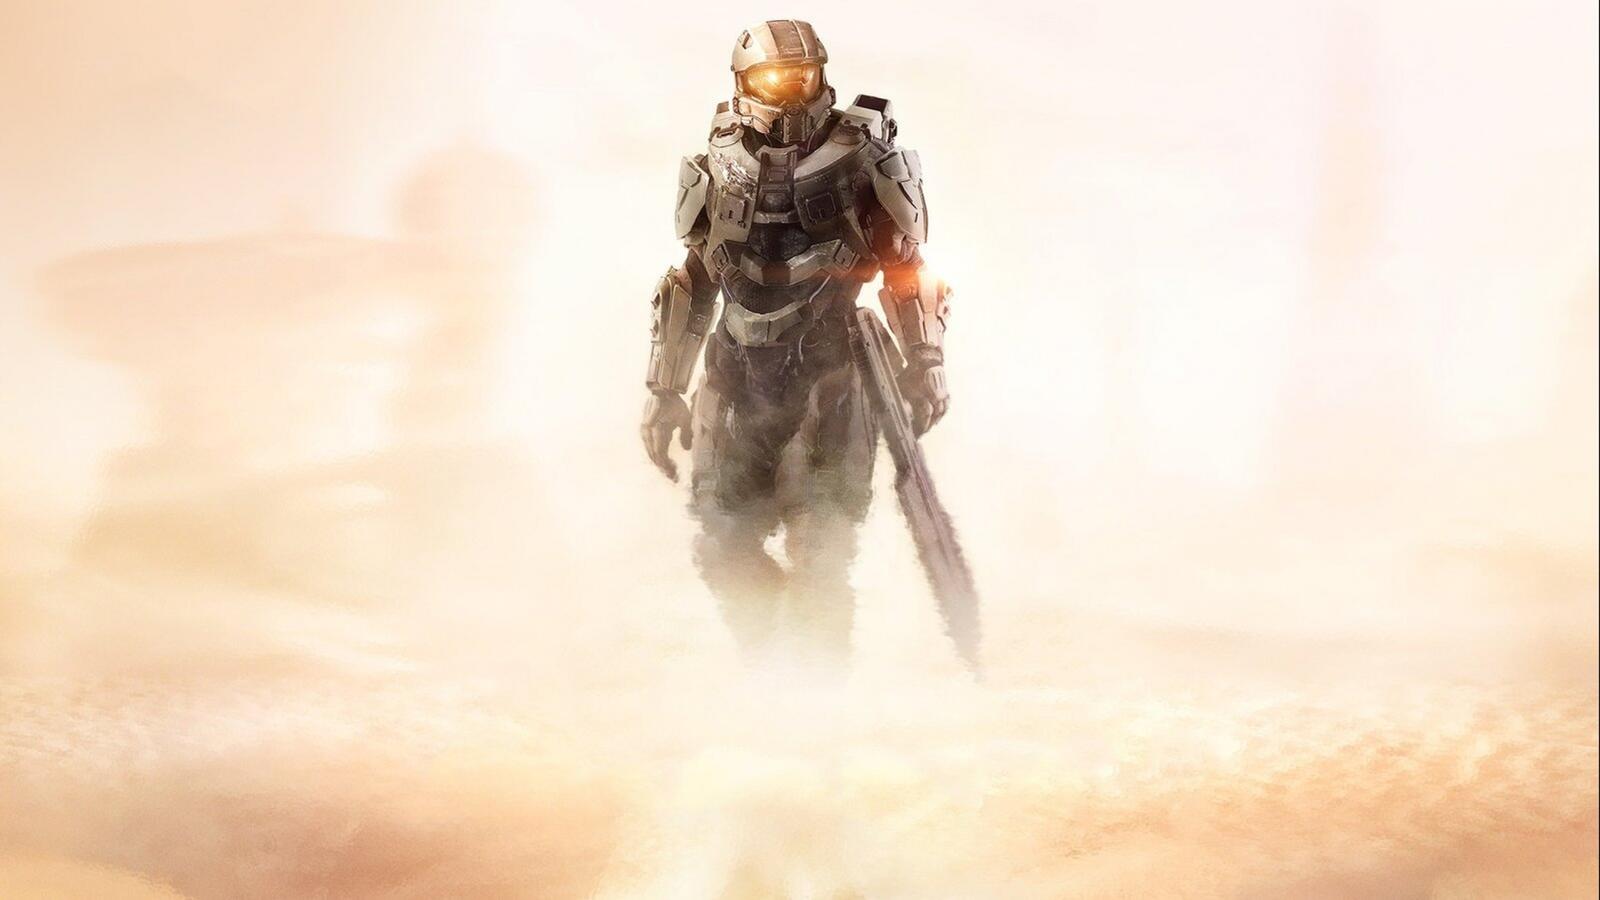 Wallpapers head chef halo 5 xbox one on the desktop